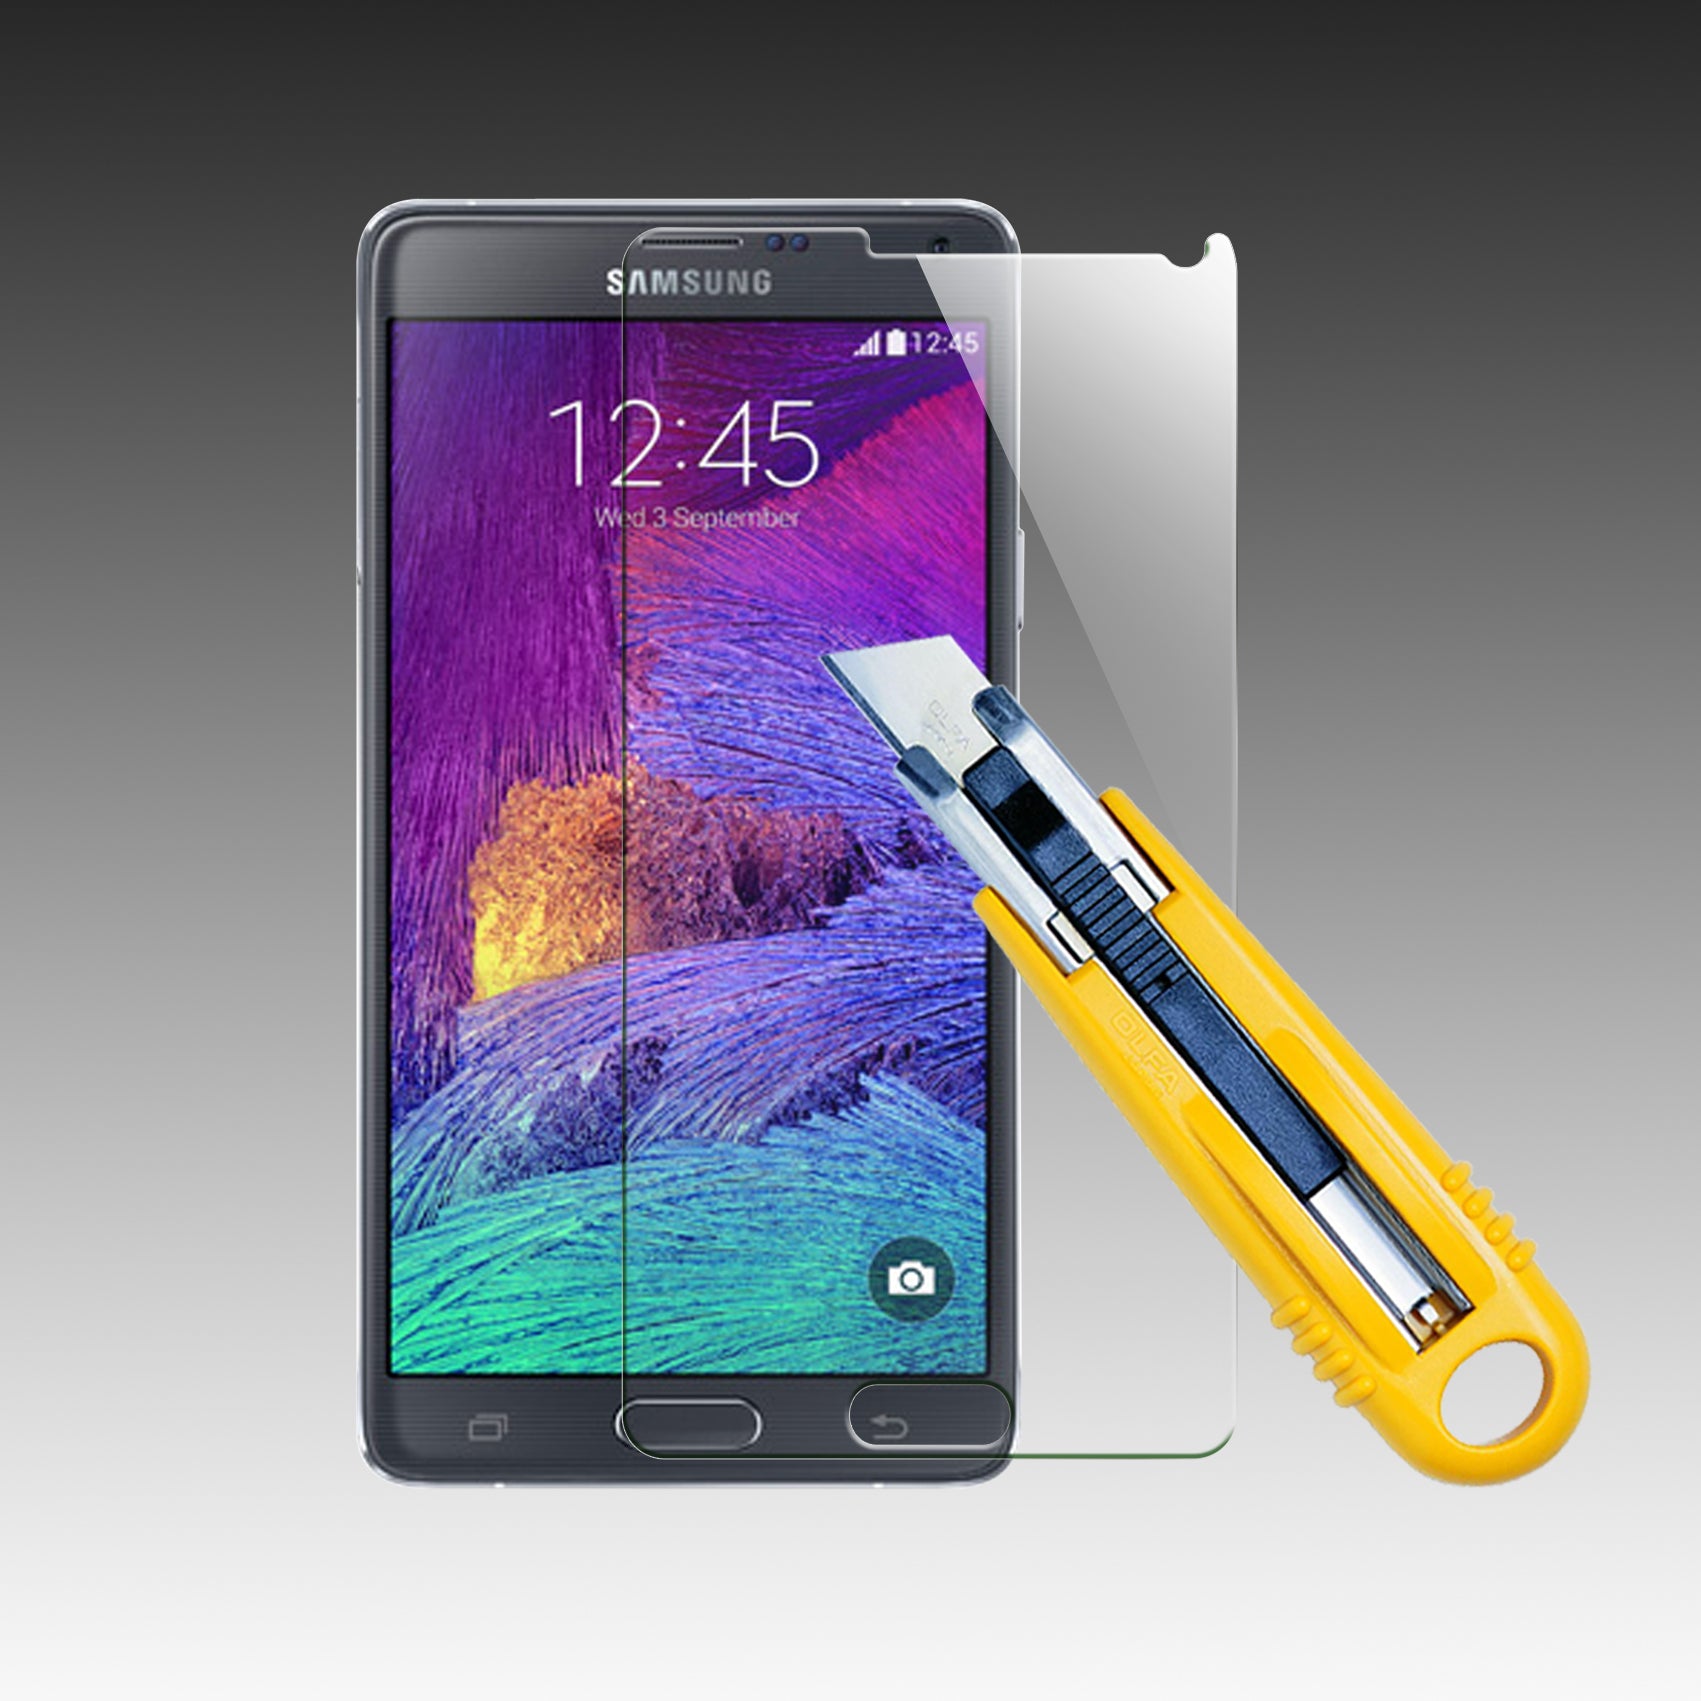 LUVVITTTEMPERED GLASS Screen Protector for Galaxy Note 4 - Clear